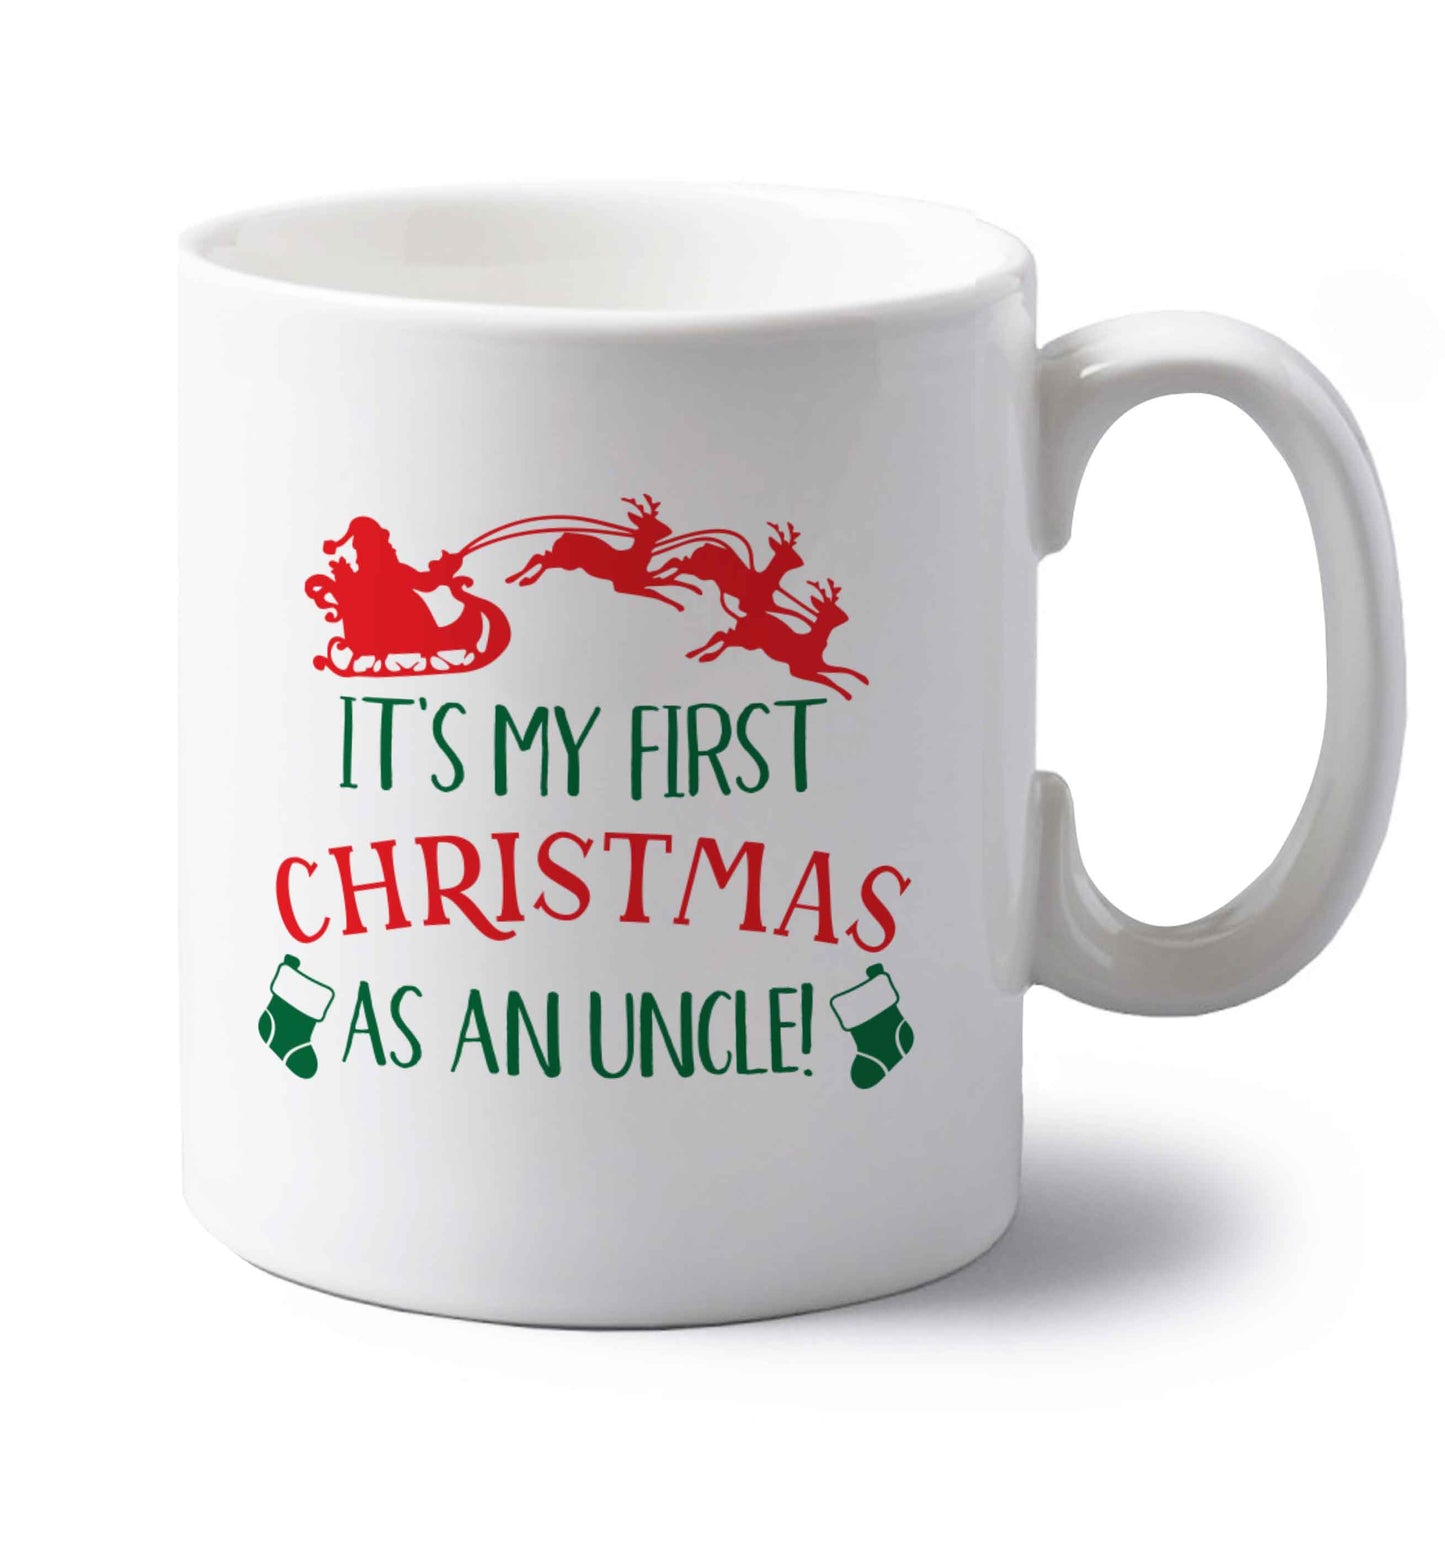 It's my first Christmas as an uncle! left handed white ceramic mug 